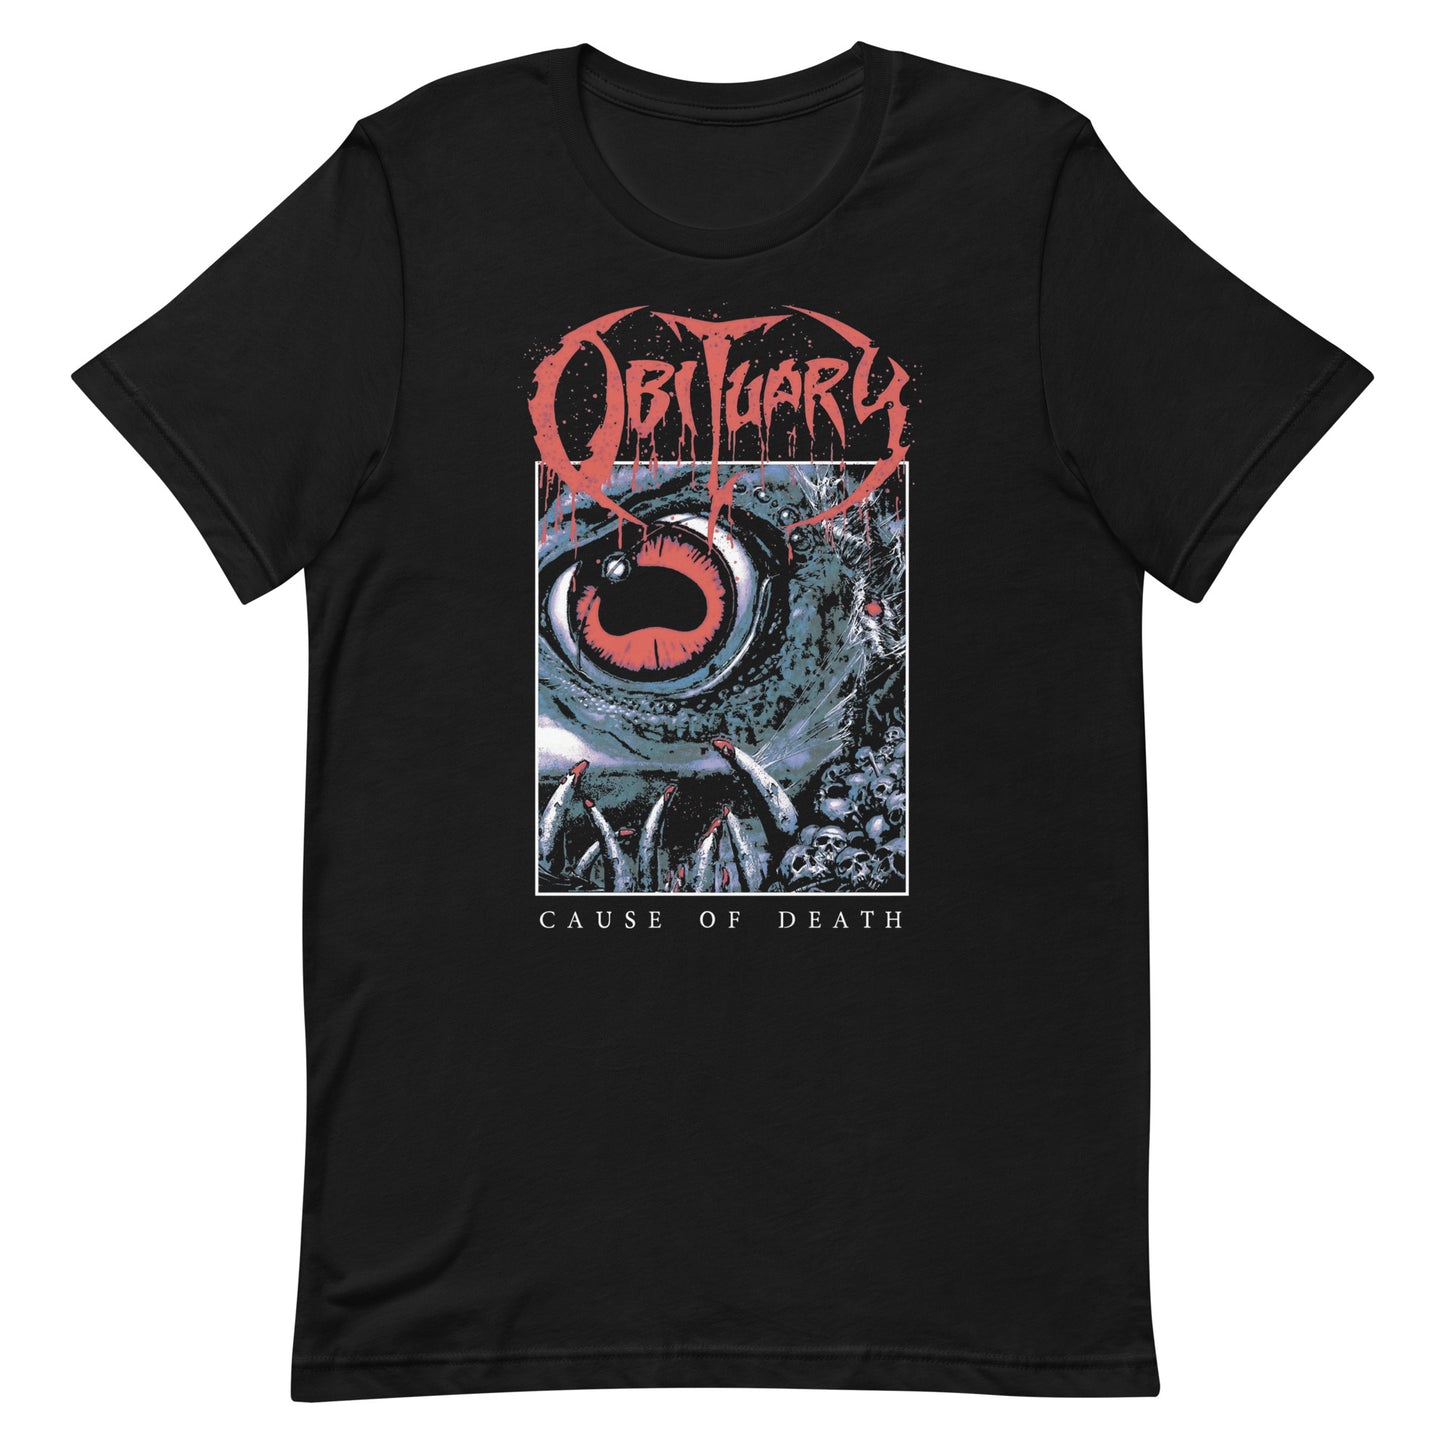 Obituary - Cause Of Death T-Shirt